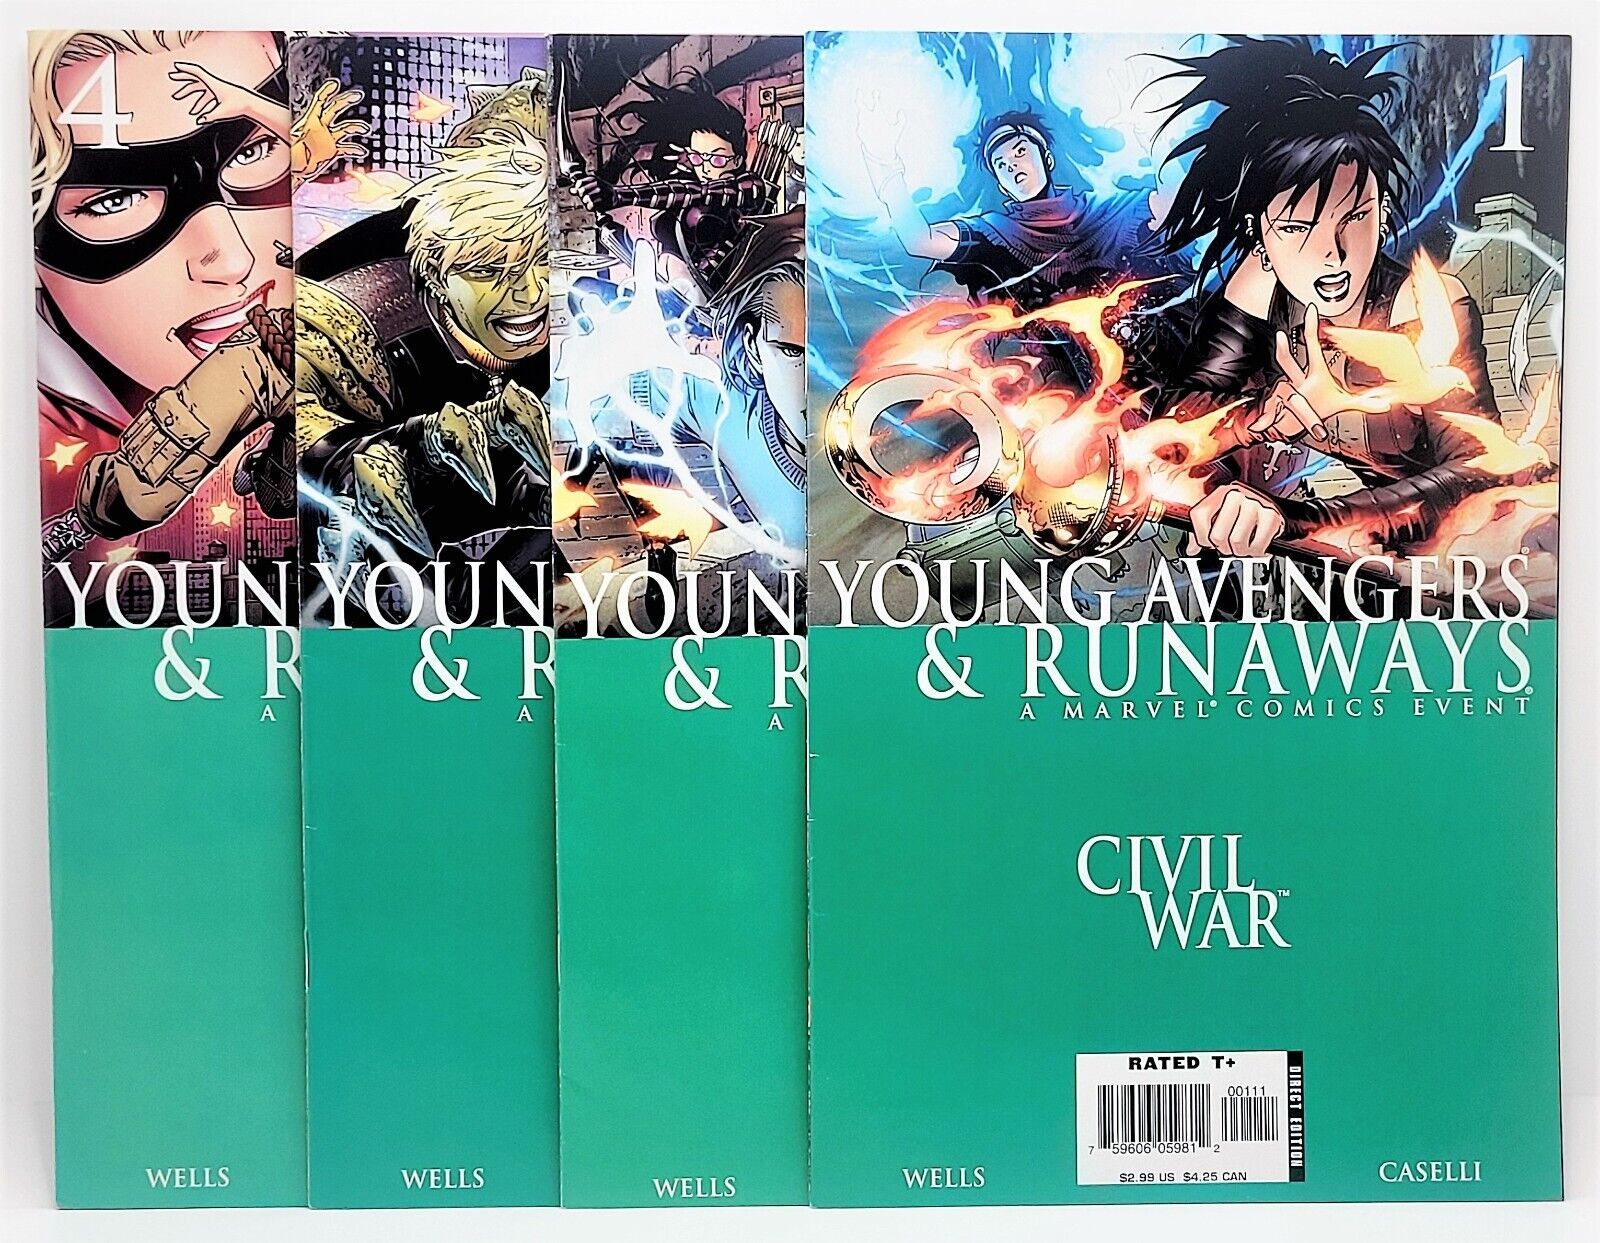 Primary image for Civil War: Young Avengers & Runaways #1-4 Published By Marvel Comics - CO6